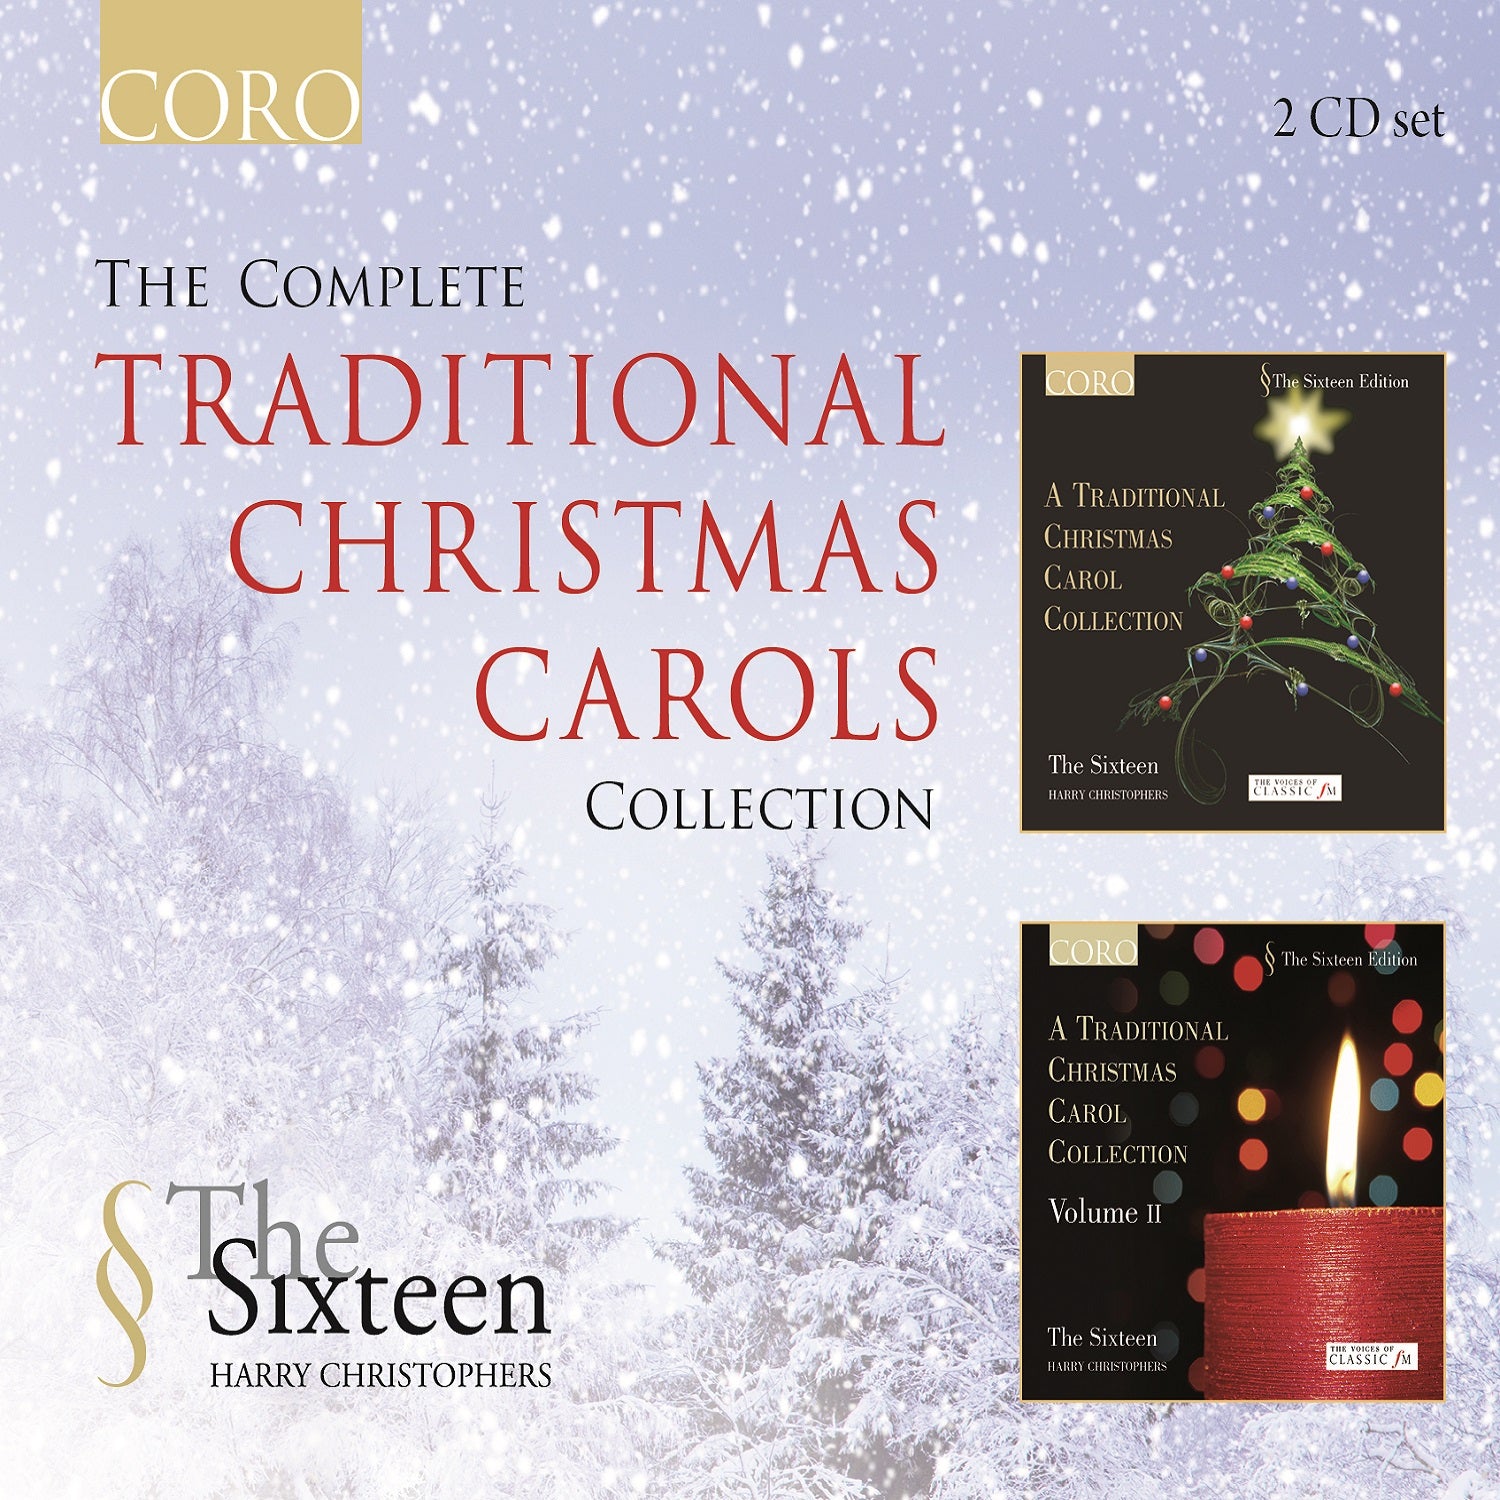 The Complete Traditional Christmas Carols Collection / Christophers, The Sixteen